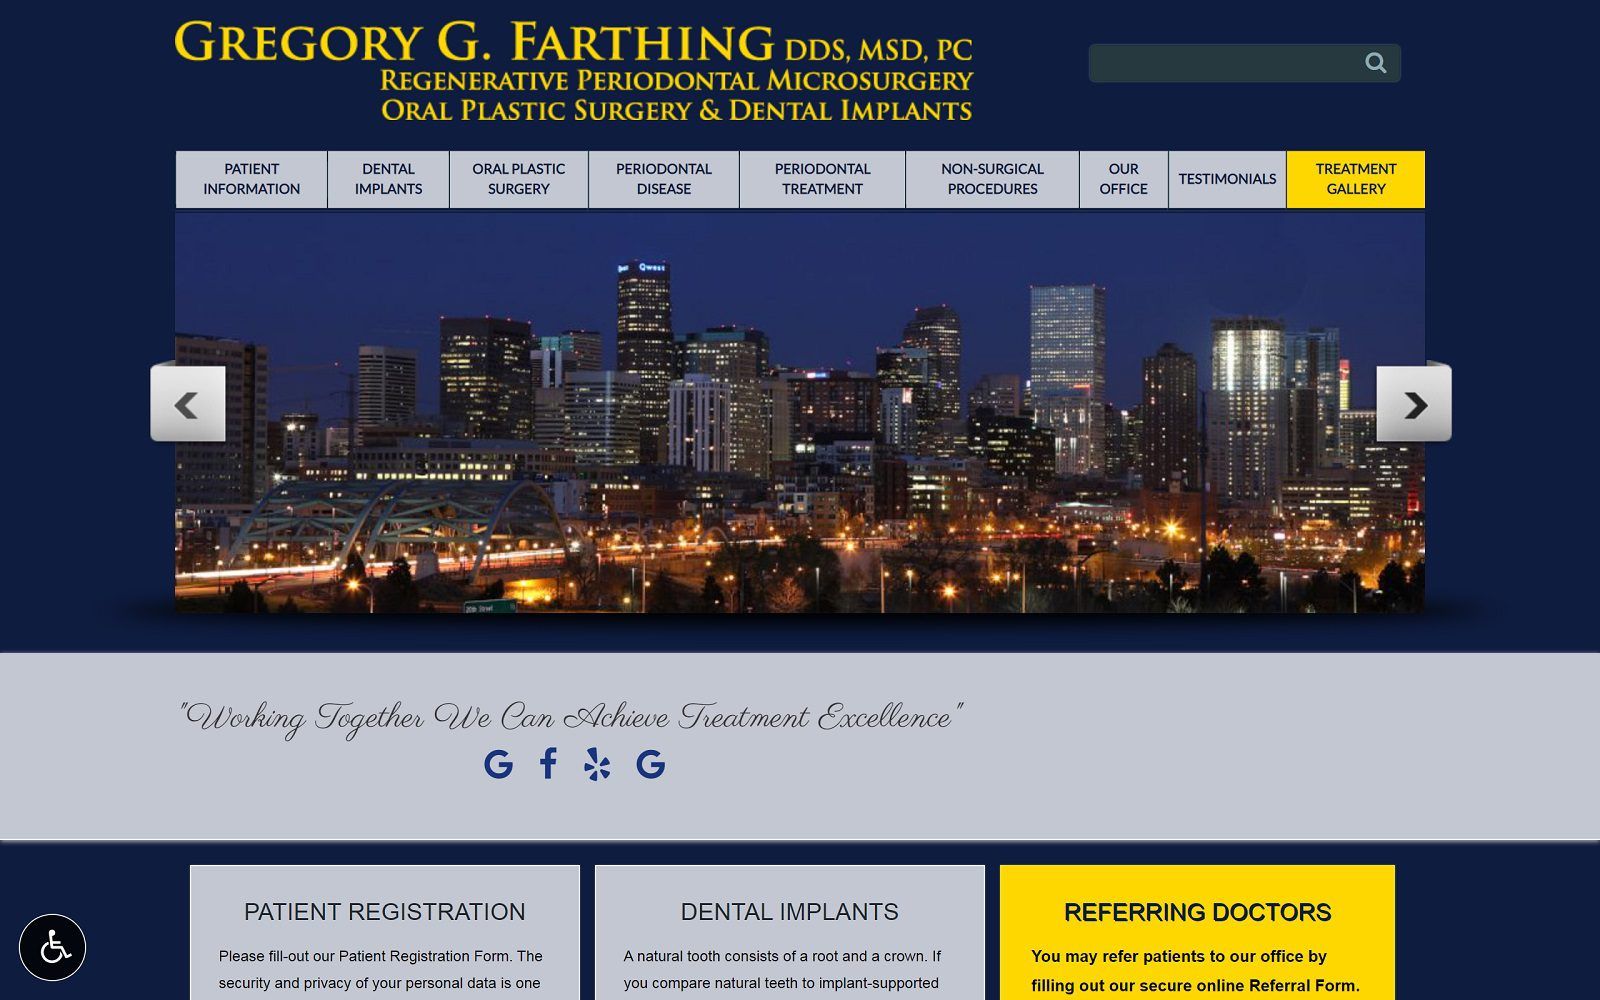 The screenshot of gregory g. Farthing, dds msd pc website